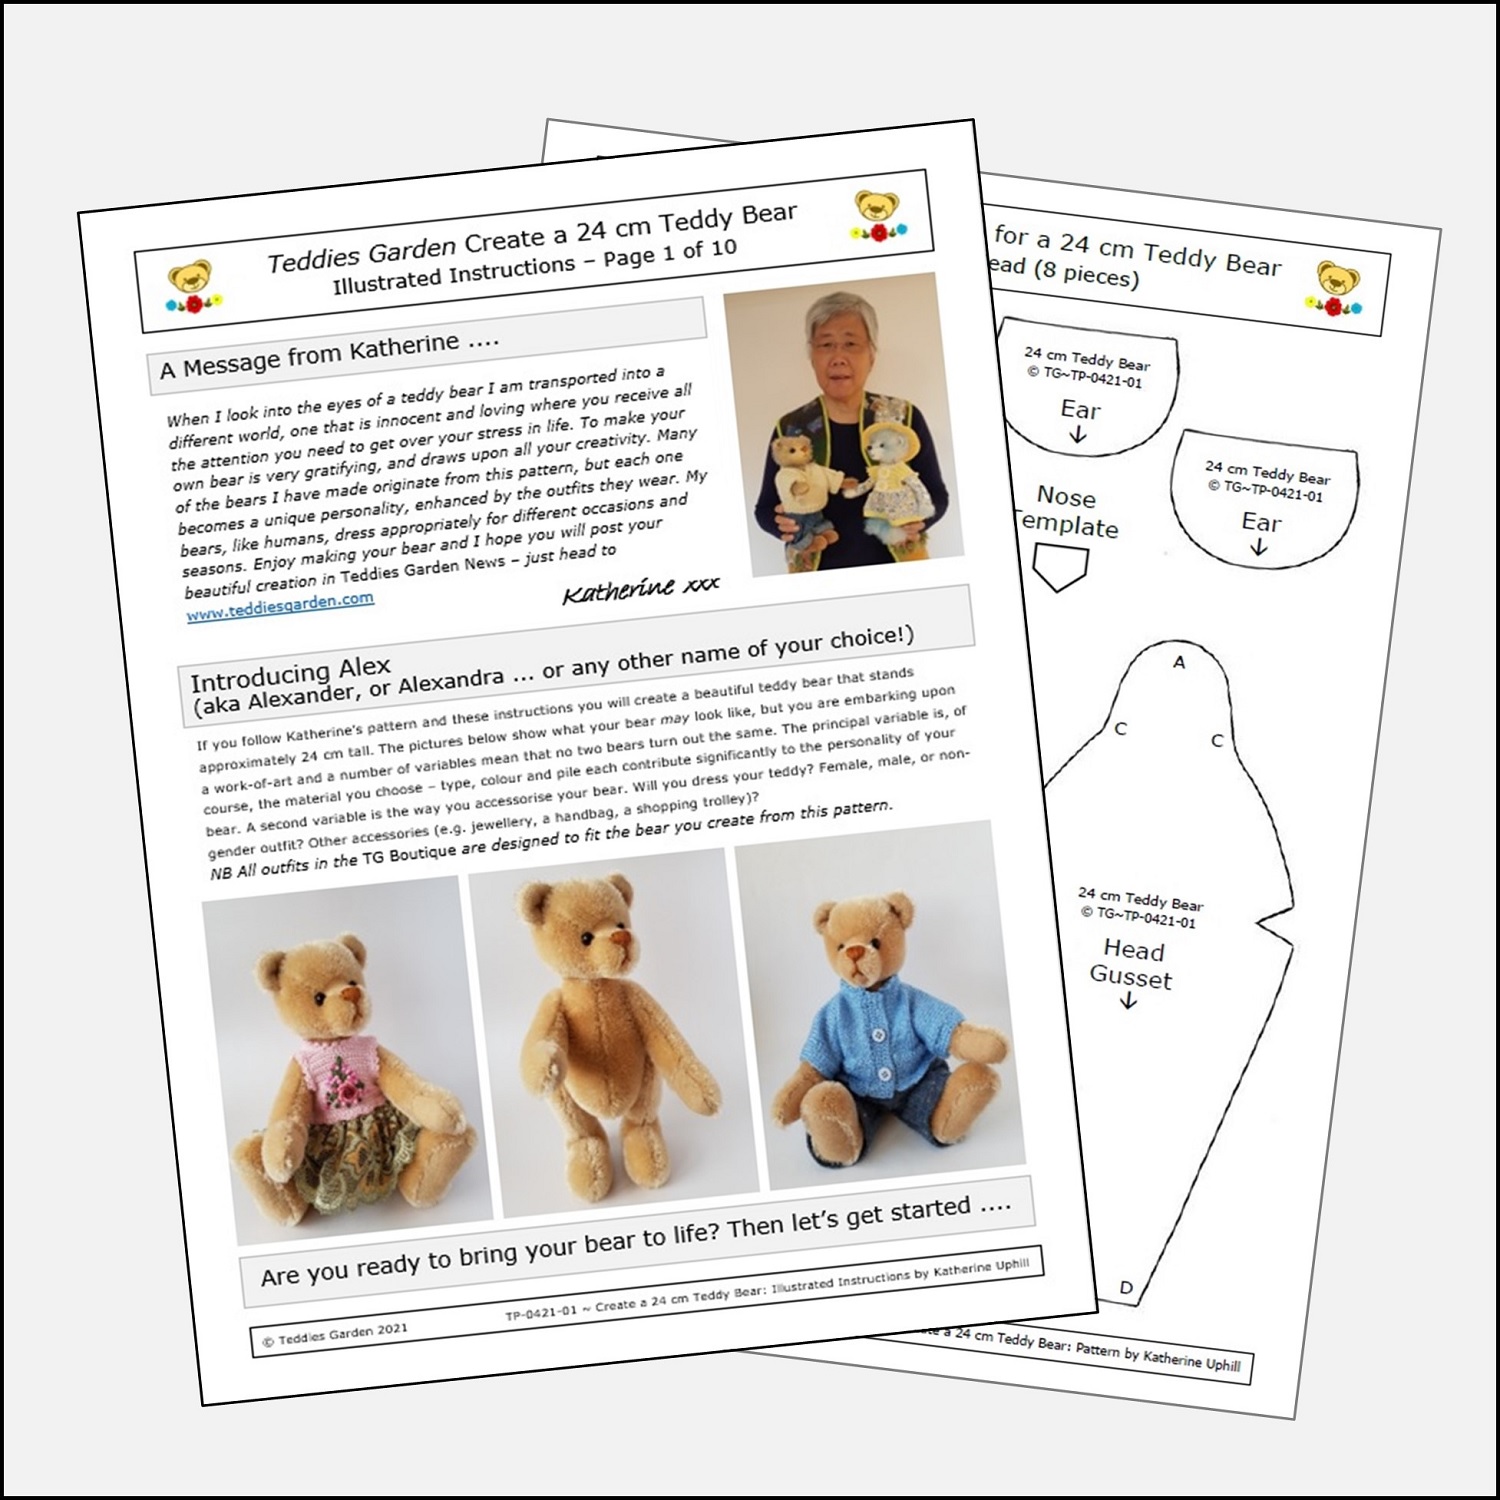 Pattern and Instructions for 'Create a 24 cm Teddy Bear' - Teddies